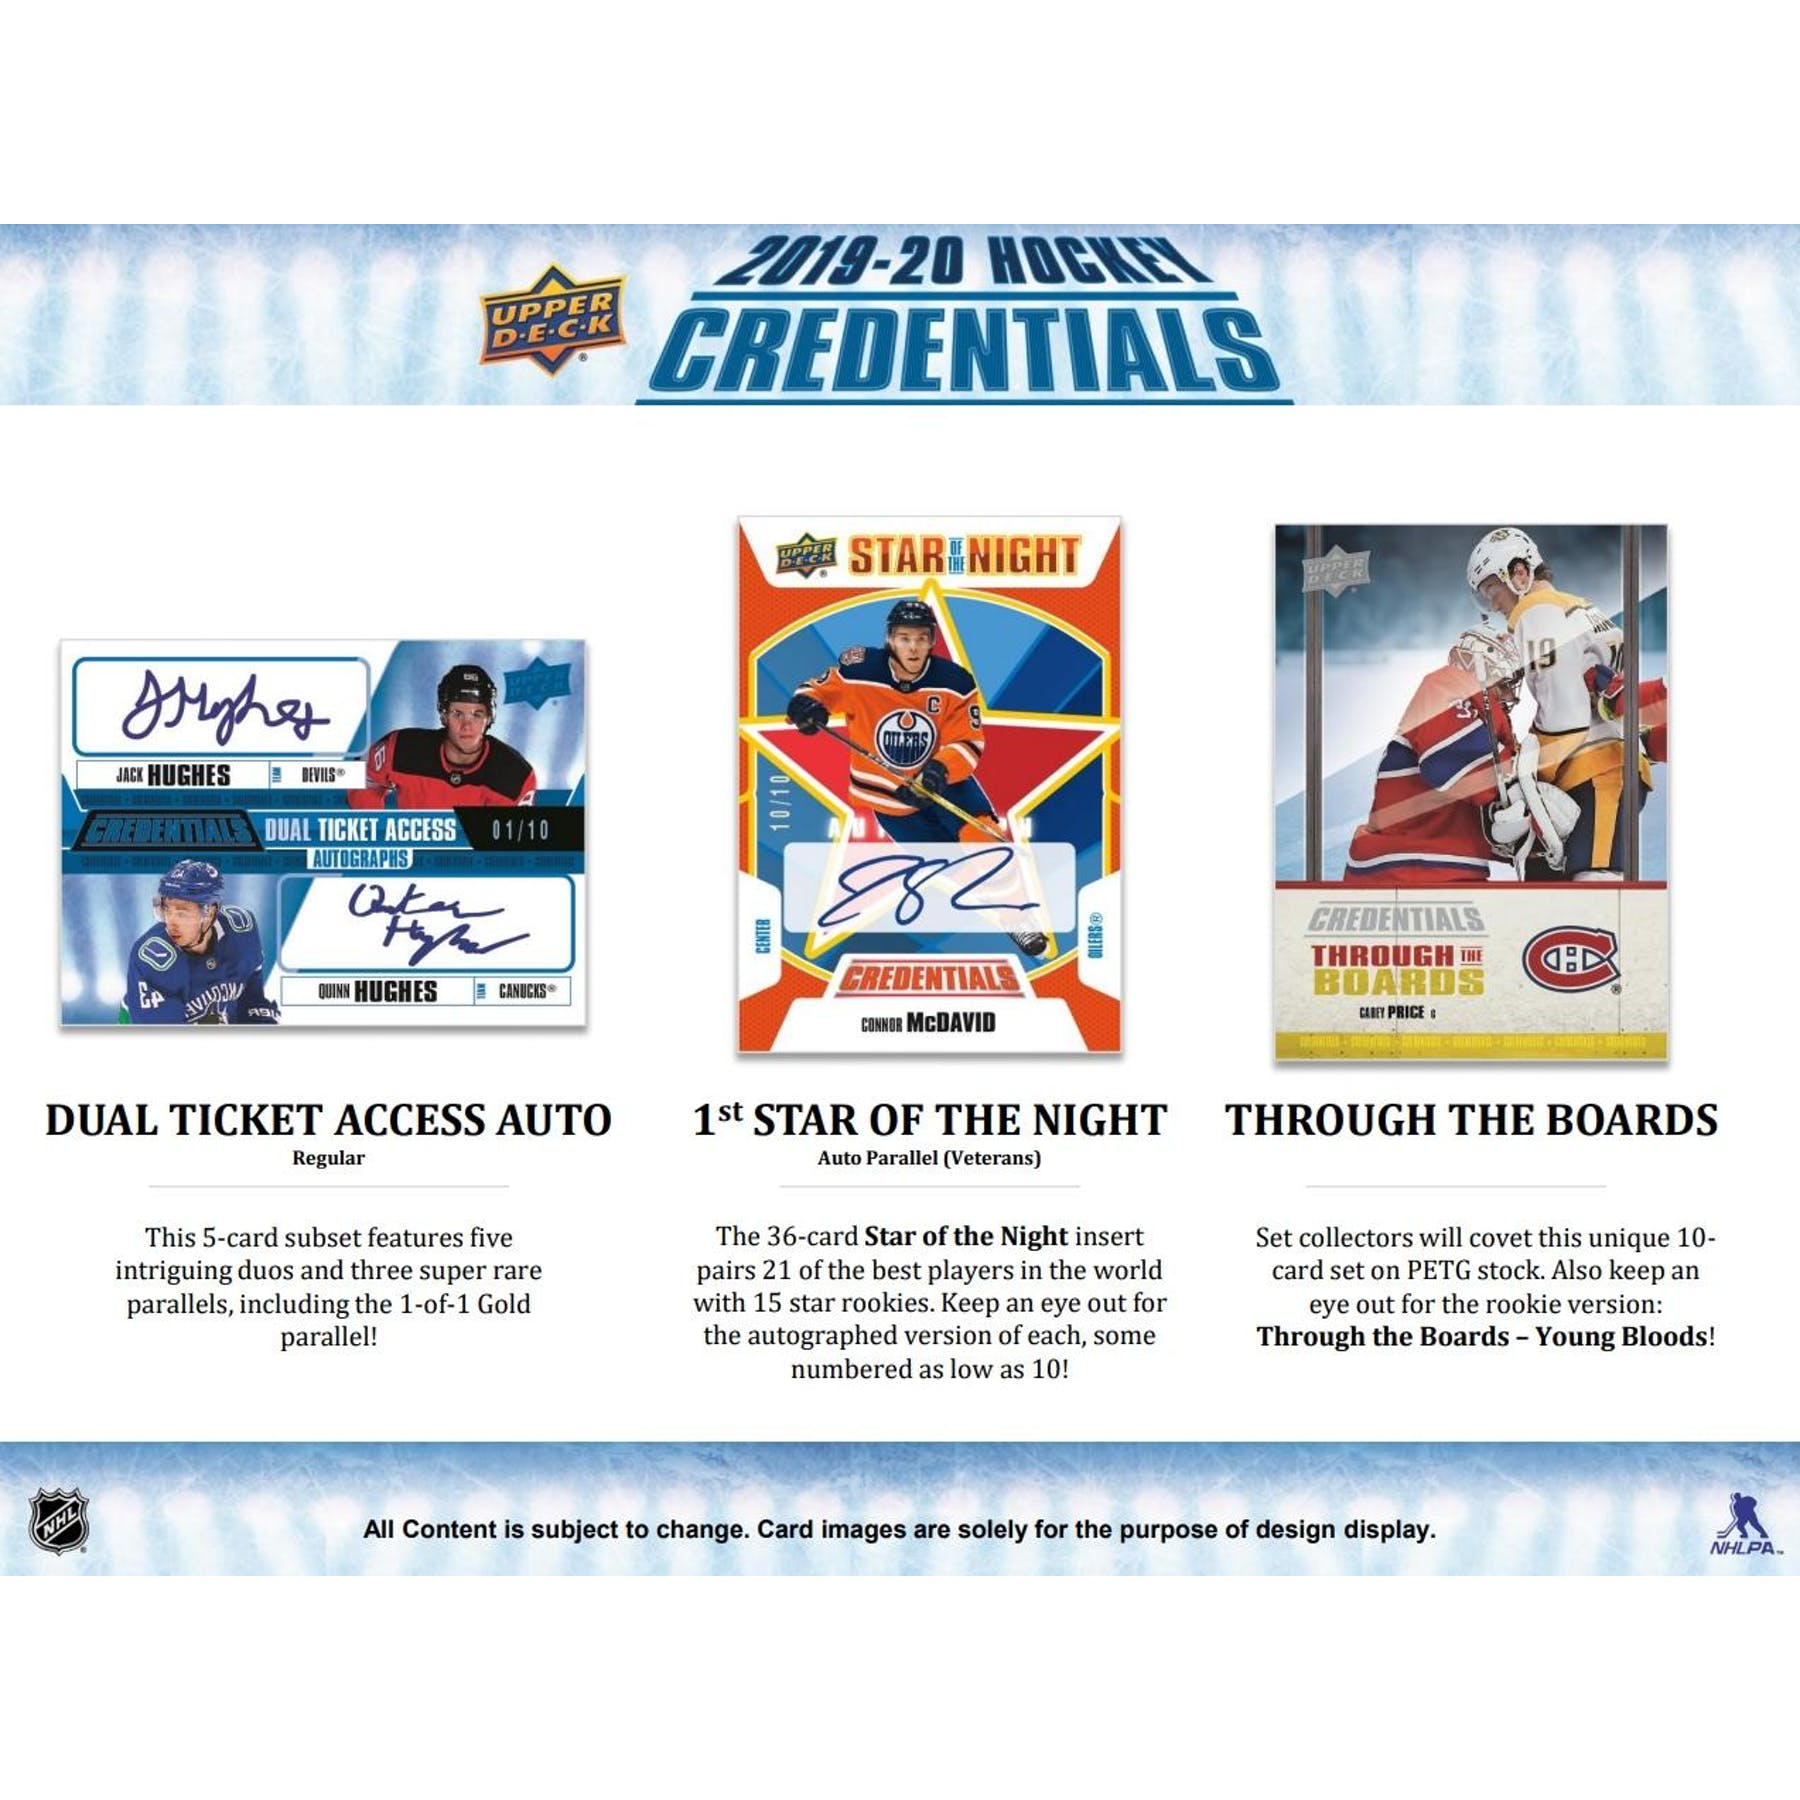 2019-20 Upper Deck Credentials Hockey Hobby Pack | Eastridge Sports Cards